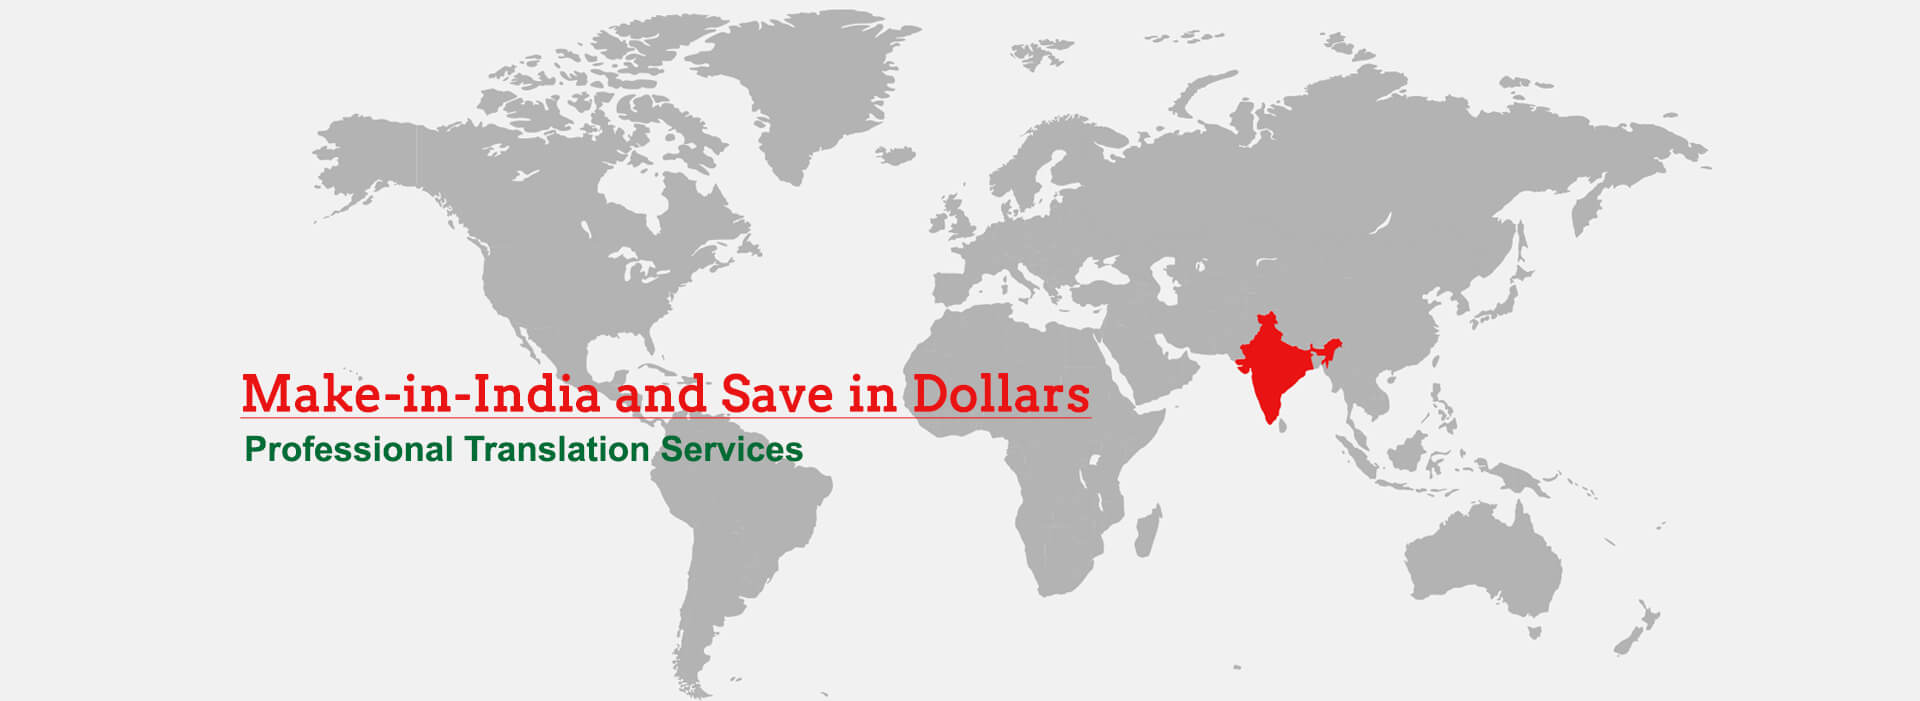 make in india and save in dollars - professional translations services 